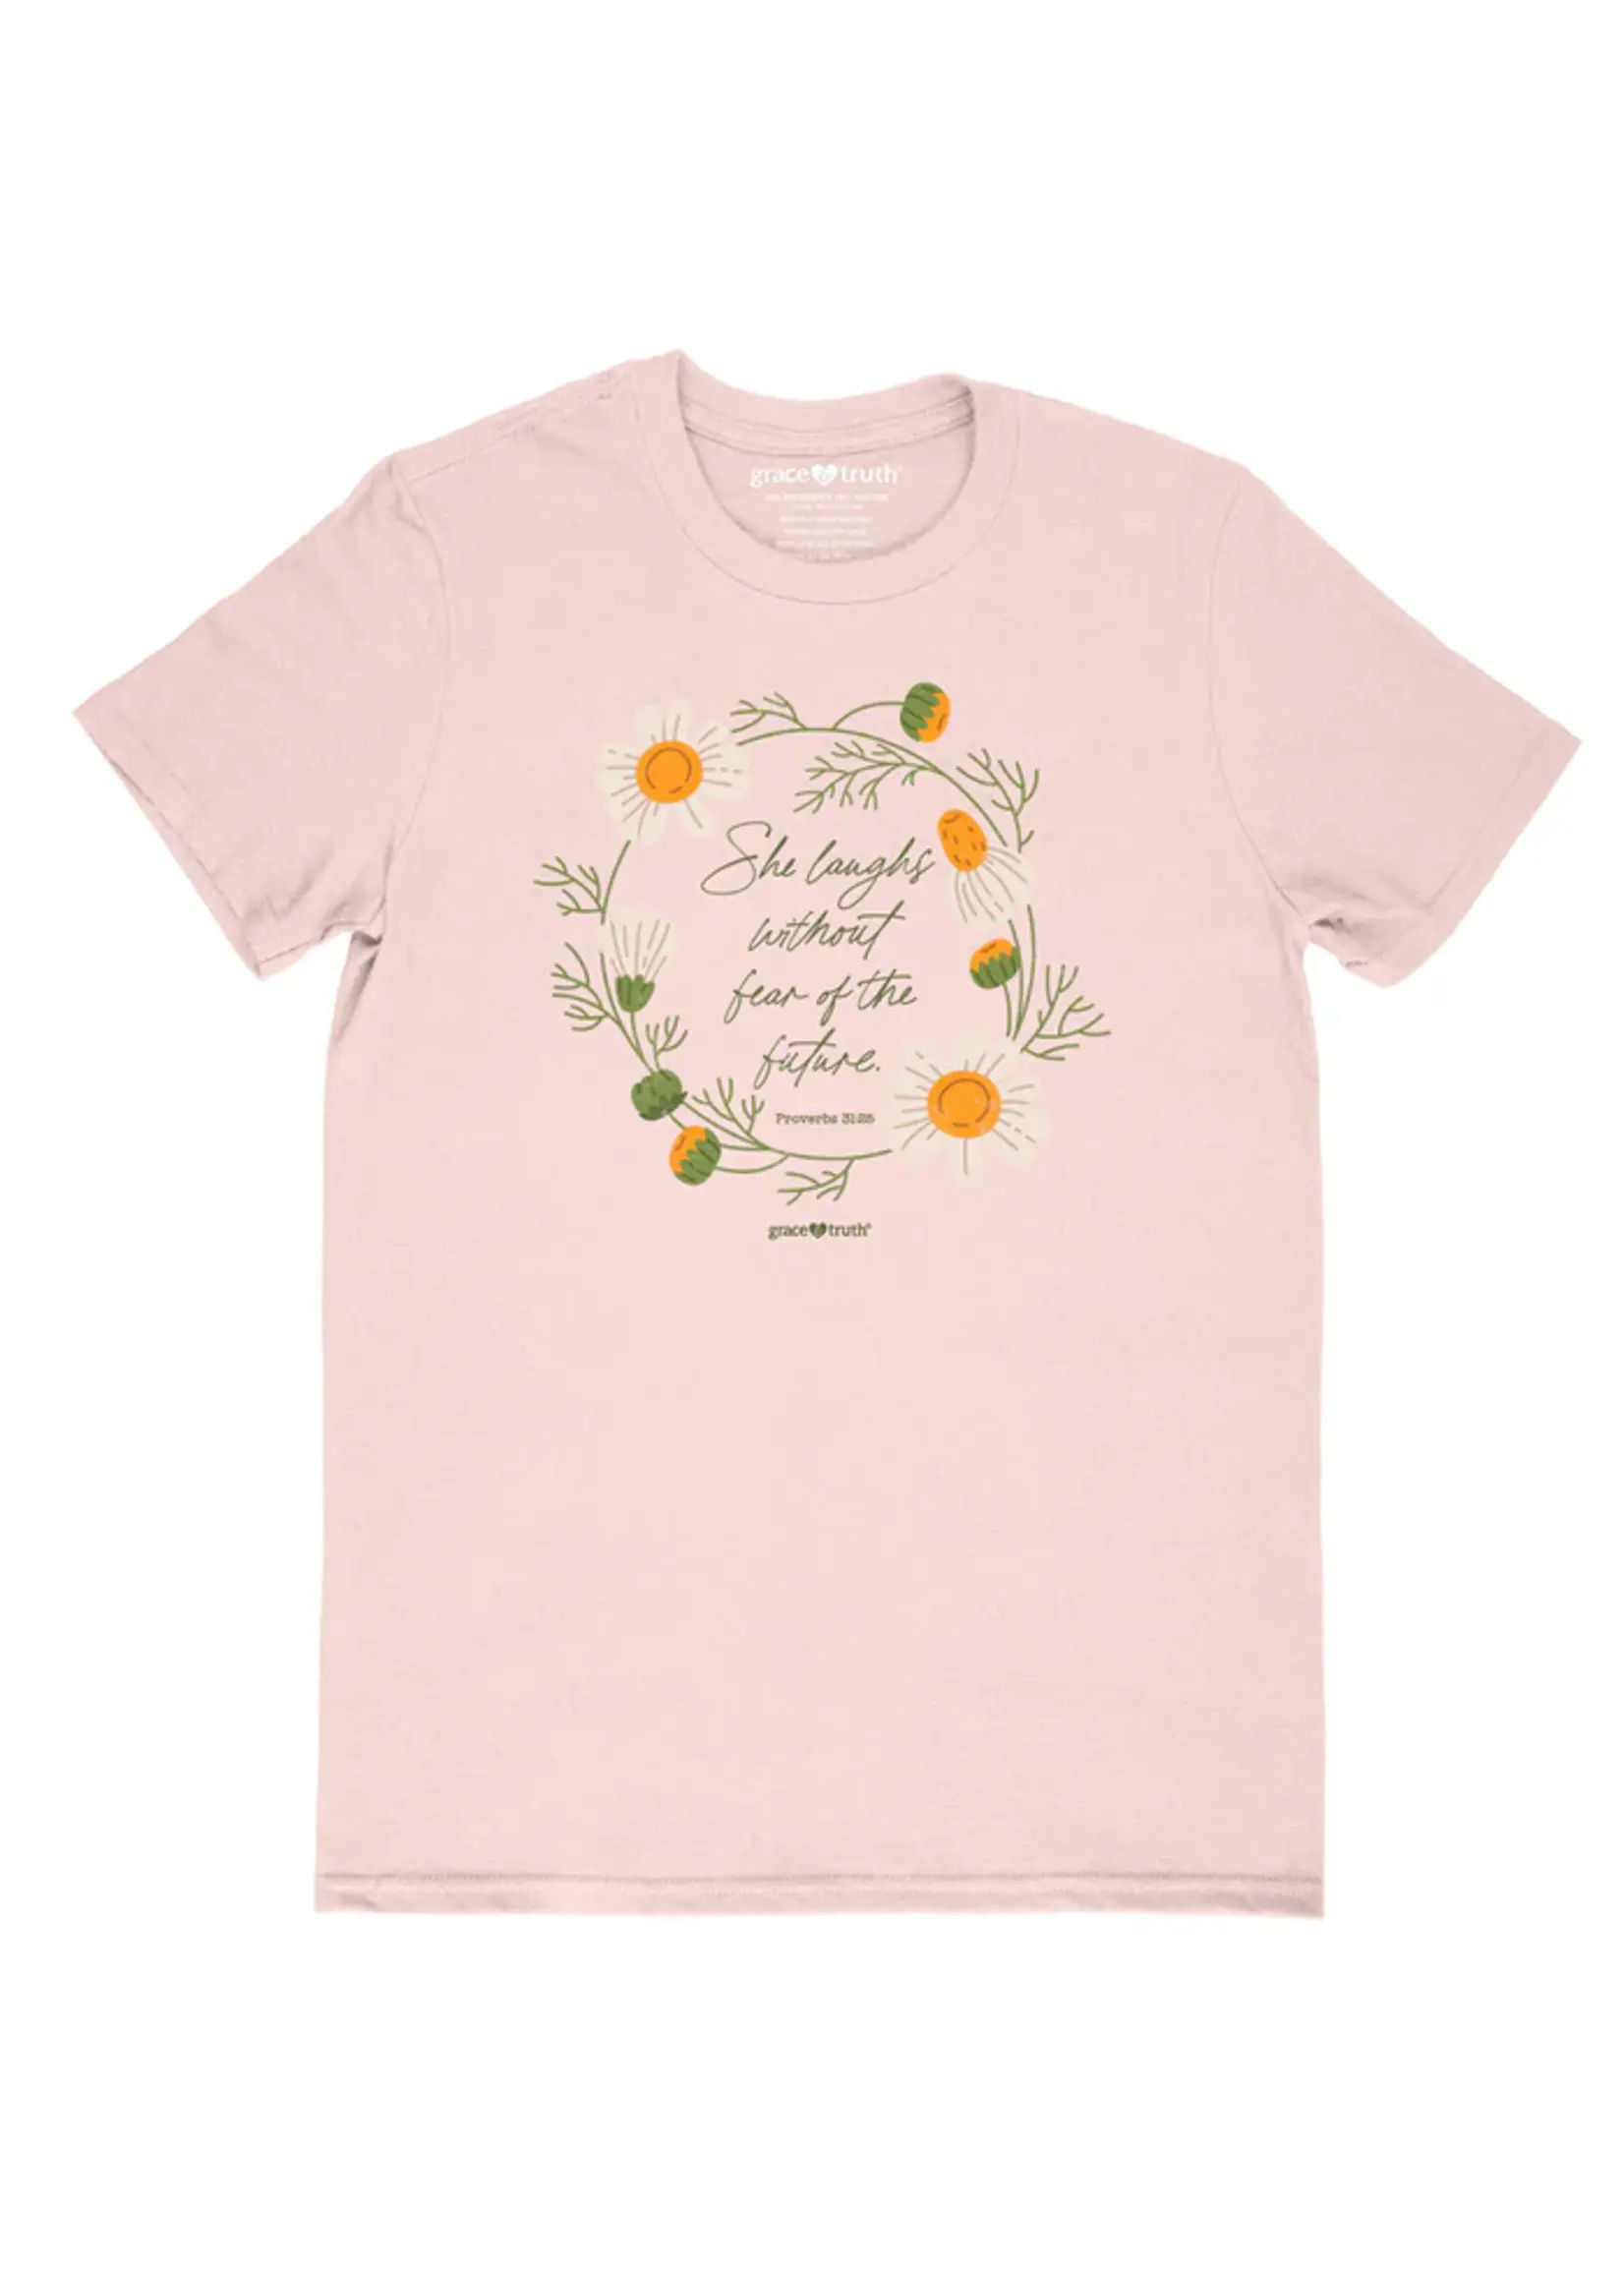 Grace & Truth "She Laughs Without Fear" Women's Tee